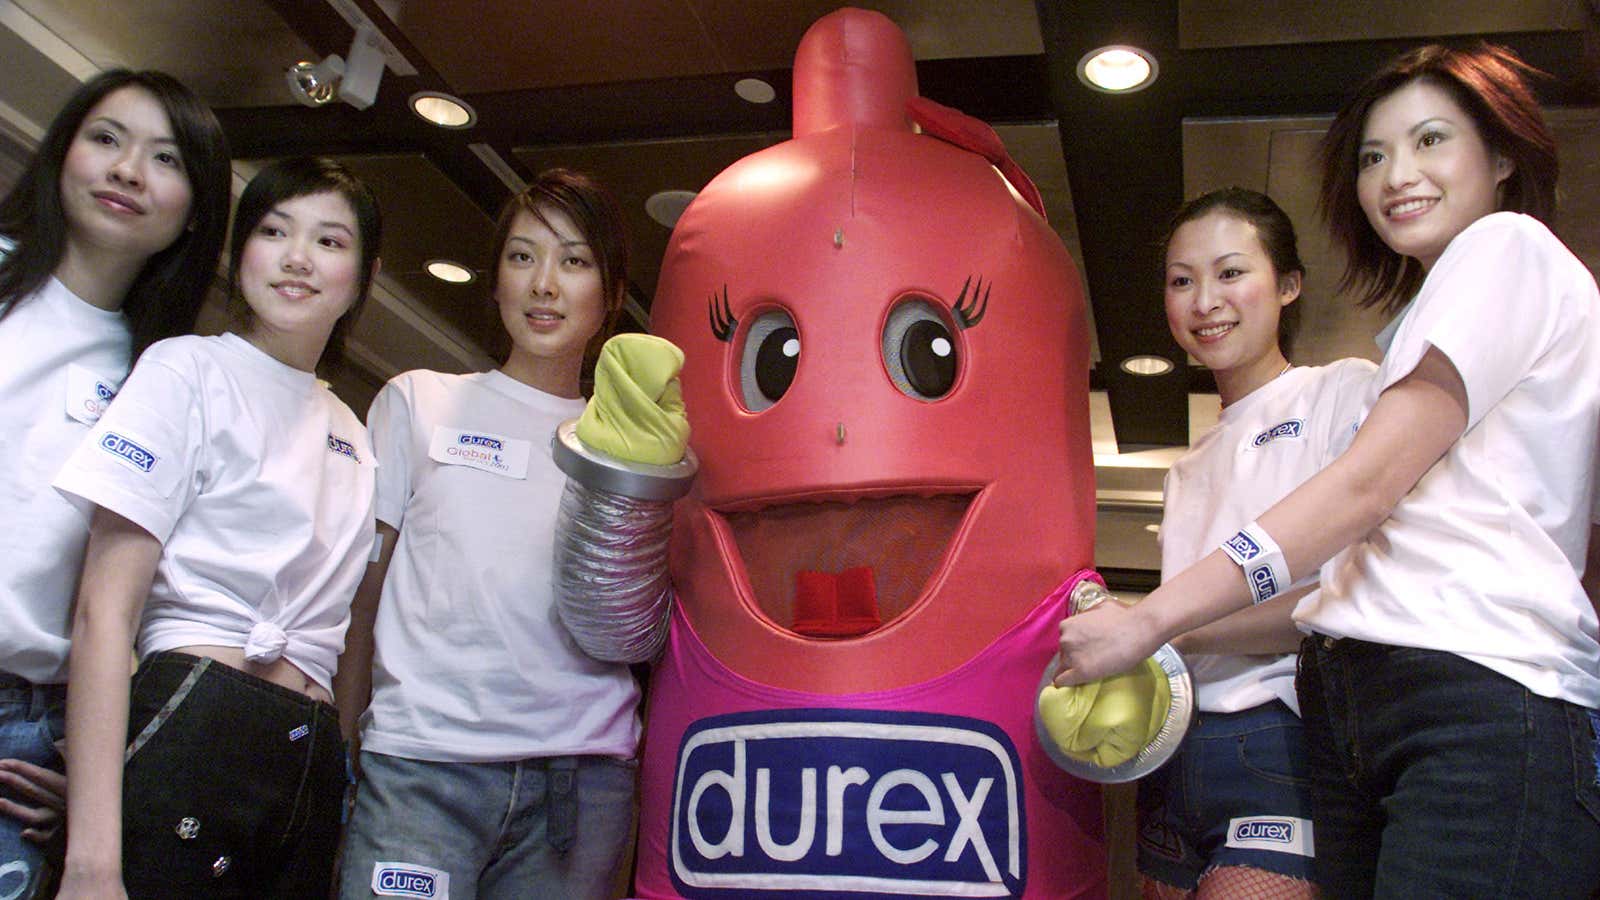 Reckitt Benckiser’s Durex is already a trusted brand, thanks to this friendly guy.